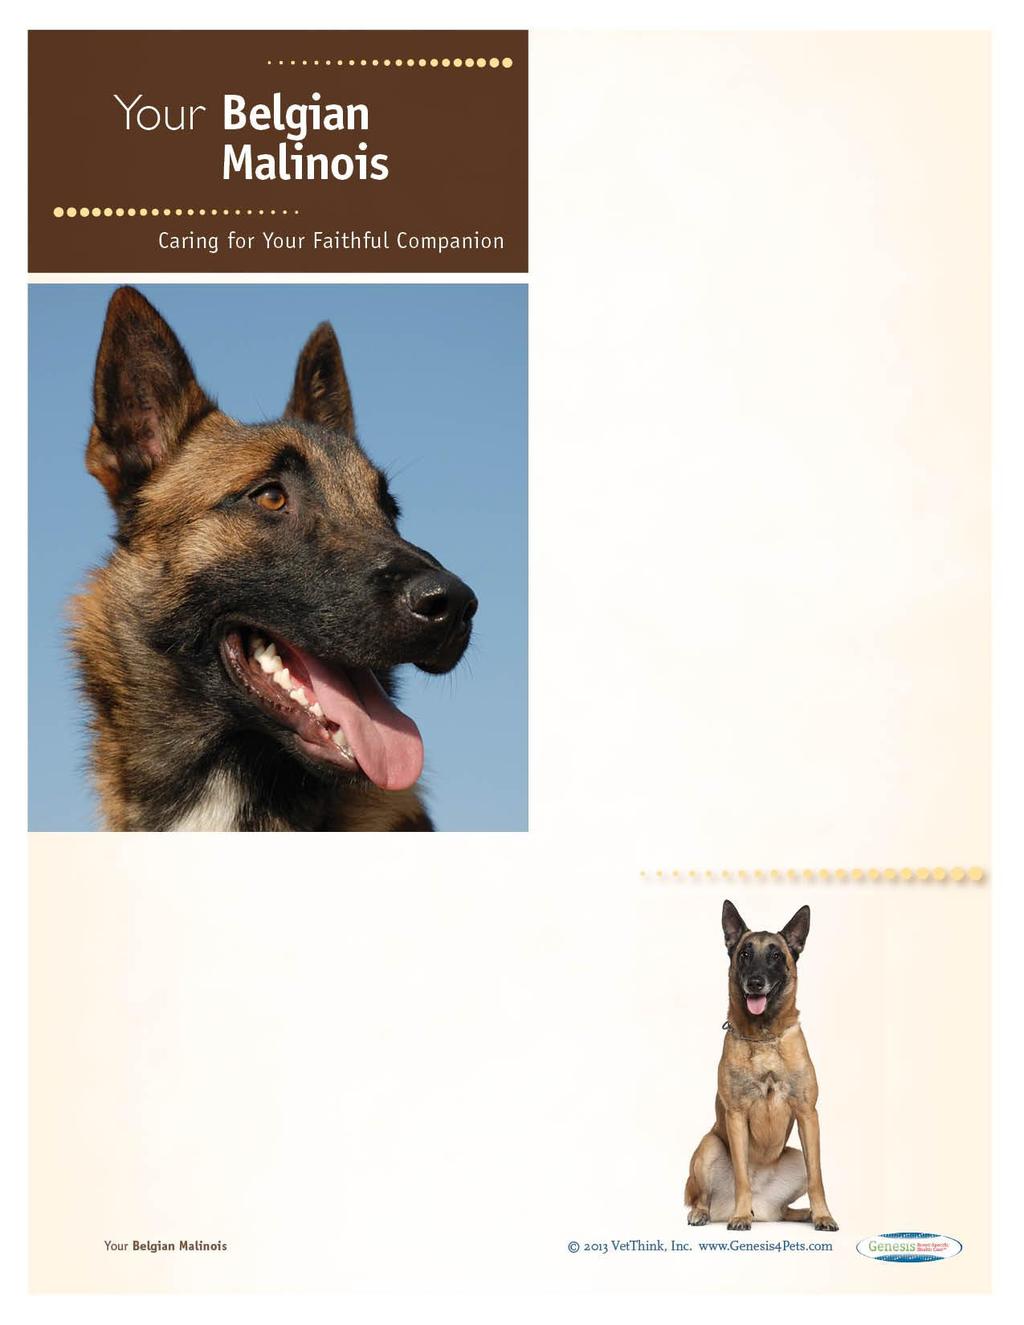 Belgian Malinois: What a Unique Breed! Your dog is special! She's your best friend, companion, and a source of unconditional love.